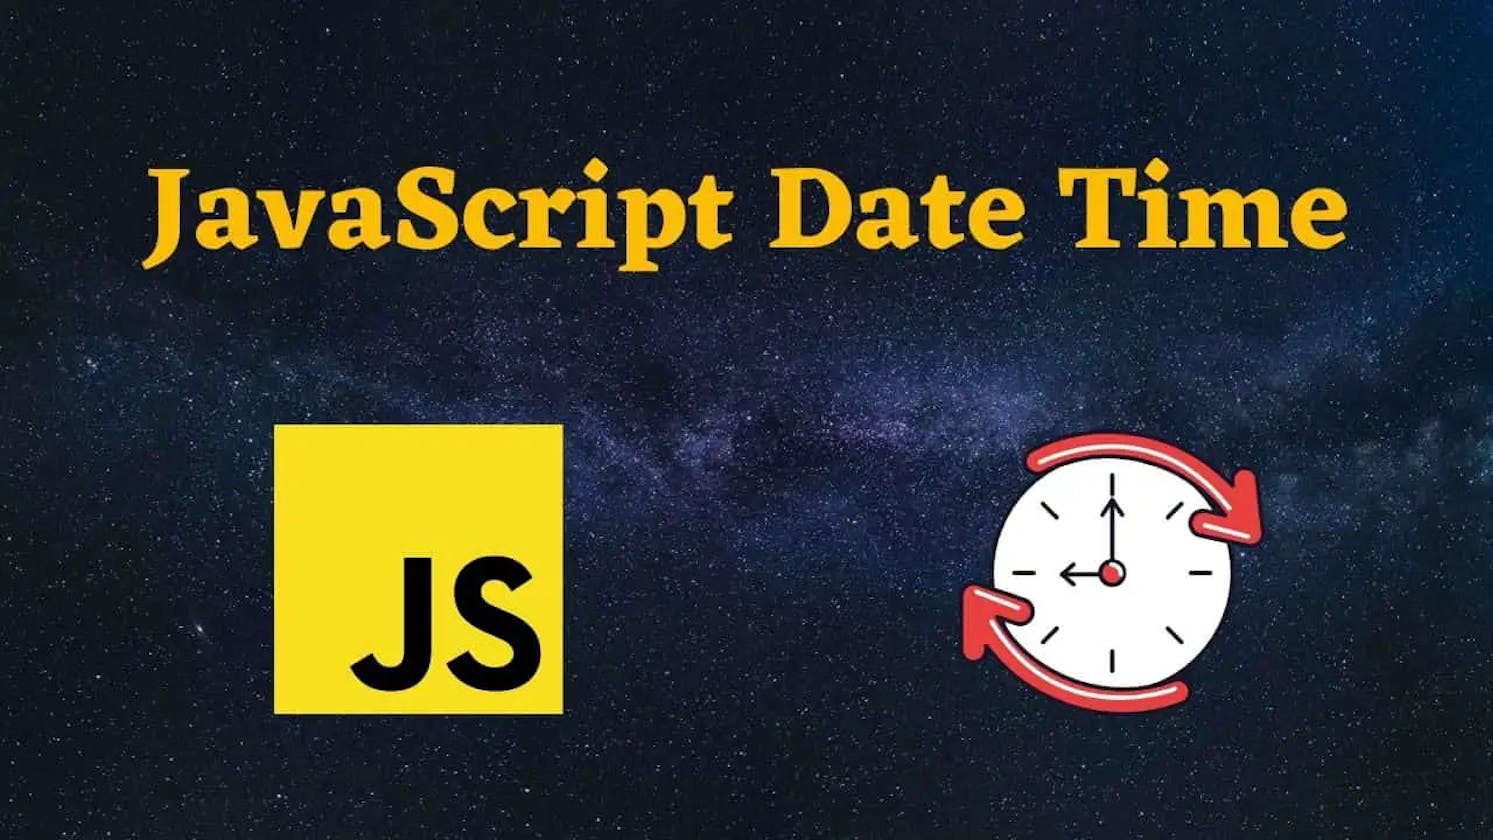 Converting UTC date time from server to local date time on the browser client using JavaScript